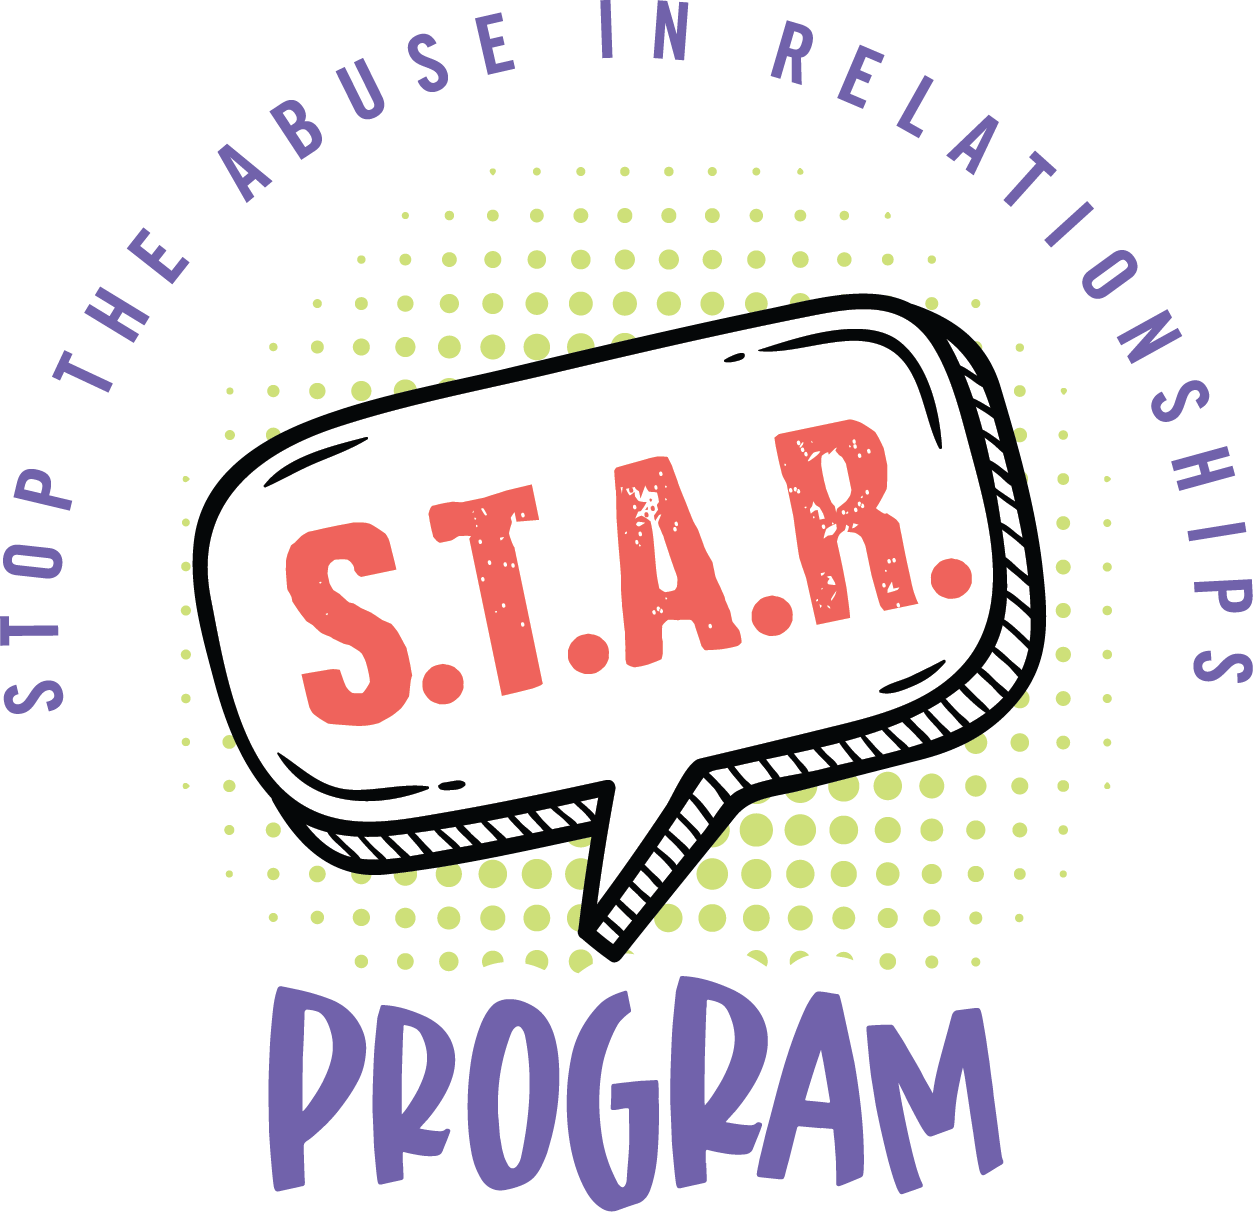 Logo of the S.T.A.R. program - Stop The Abuse in Relationships Program